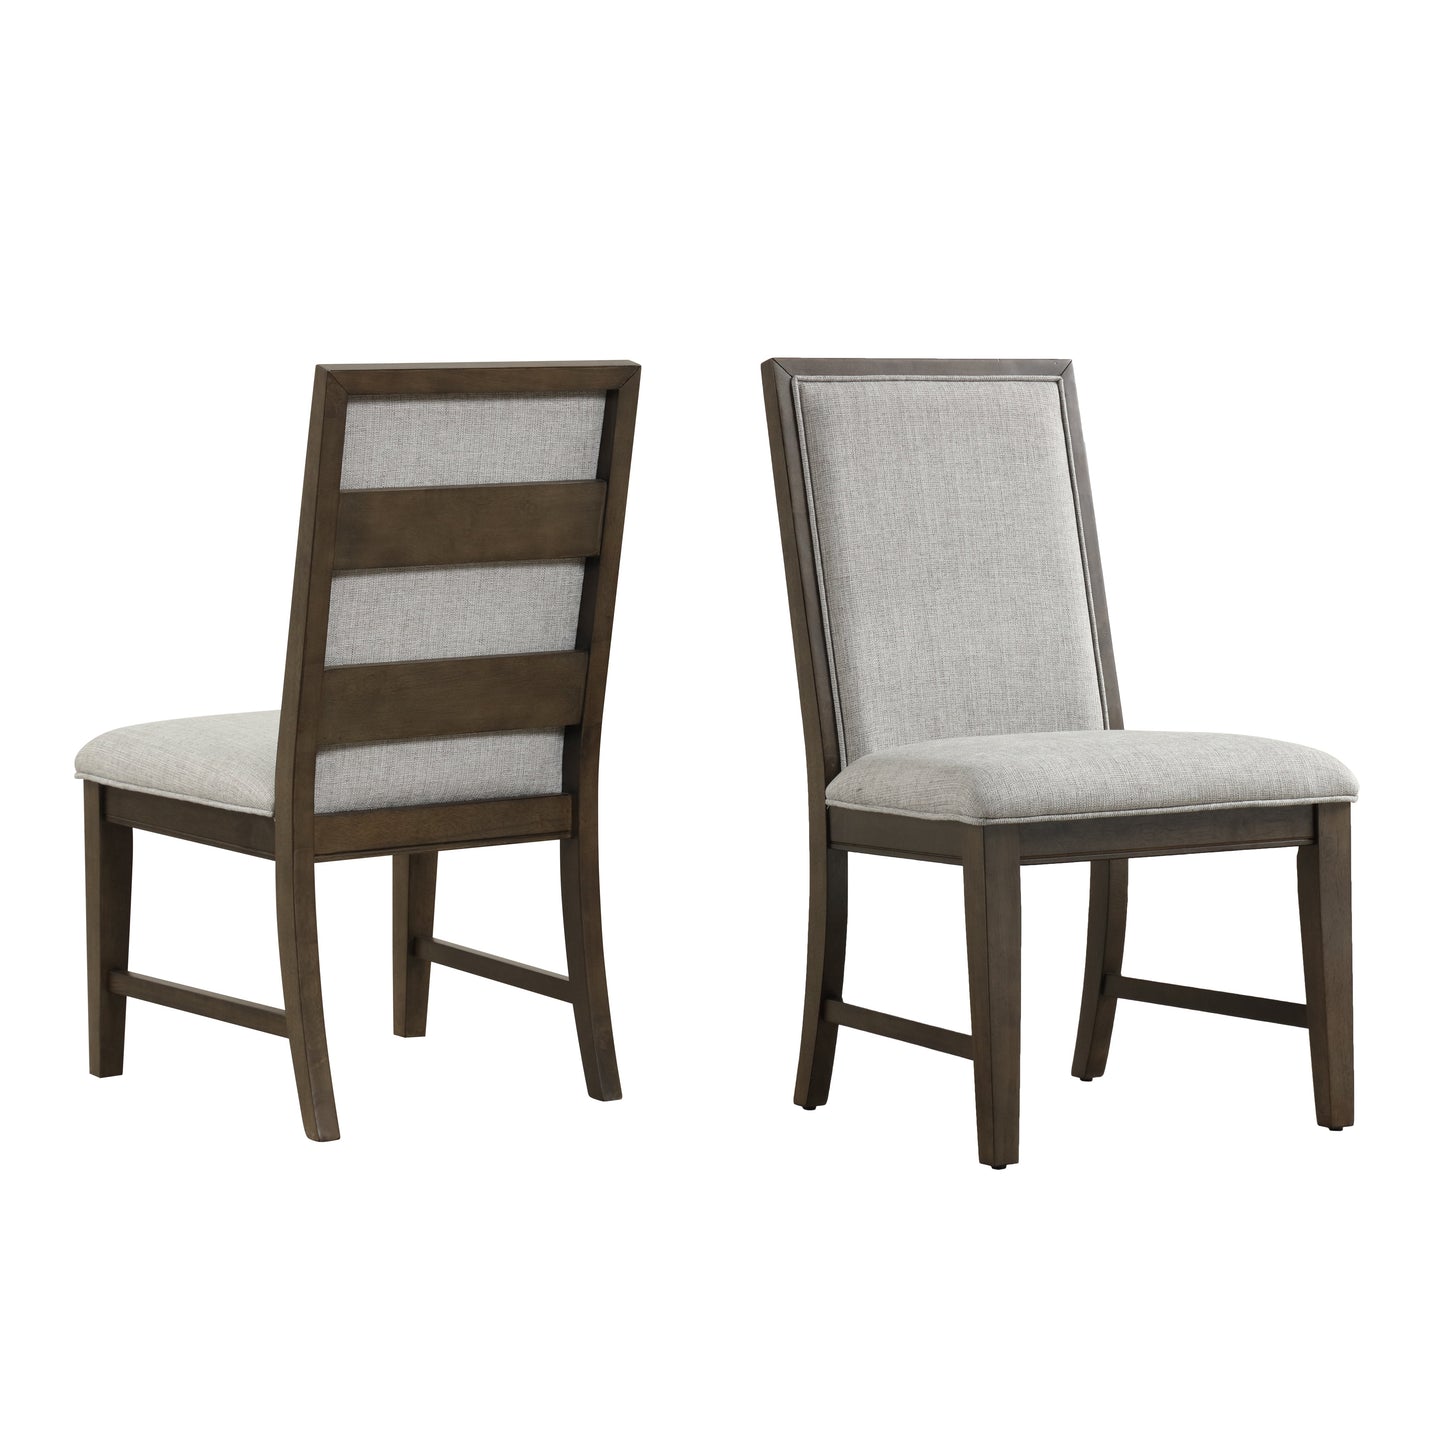 Roundhill Furniture Aberll Solid Wood Upholstered Dining Chairs, Set of 2, Gray